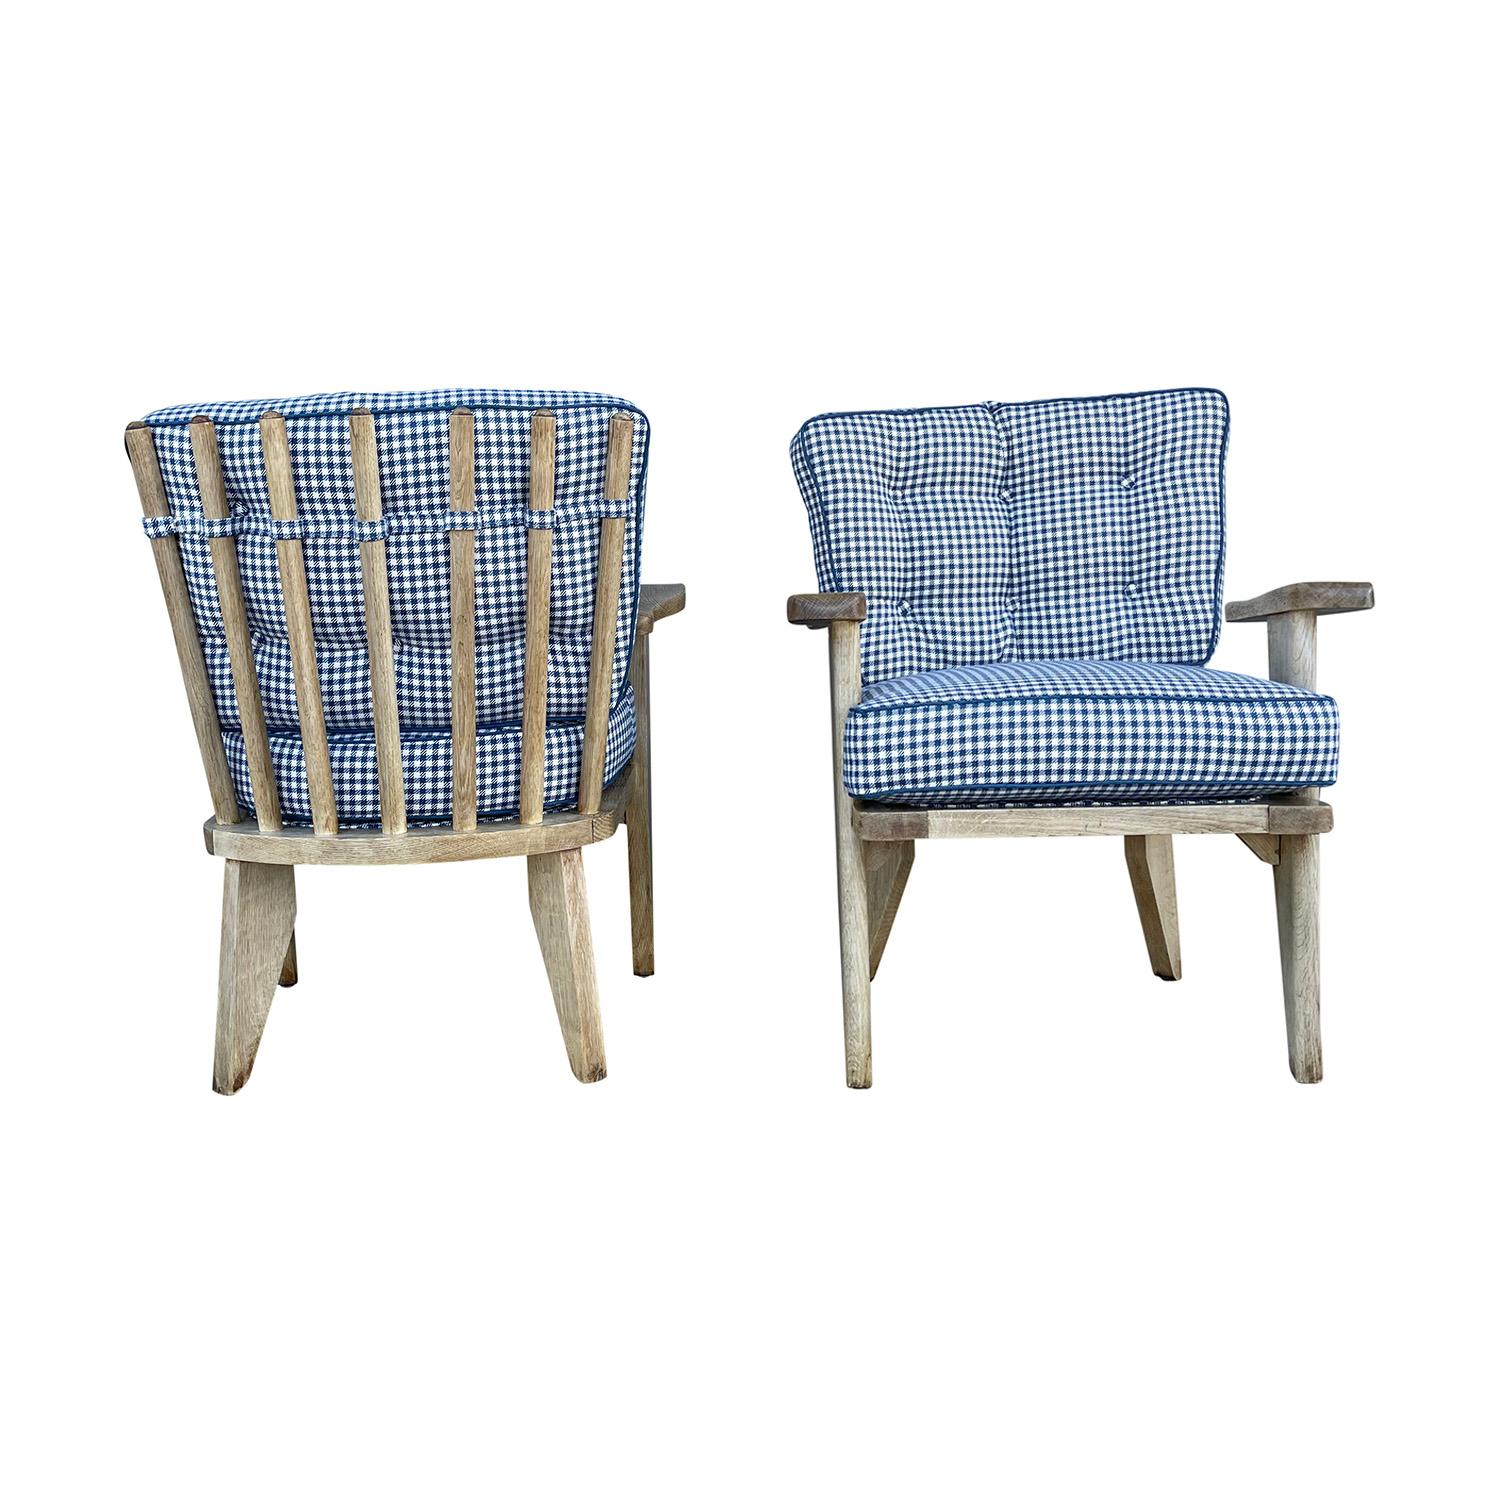 Fabric 20th Century French Pair of Oakwood Spindle Chairs by Guillerme et Chambron